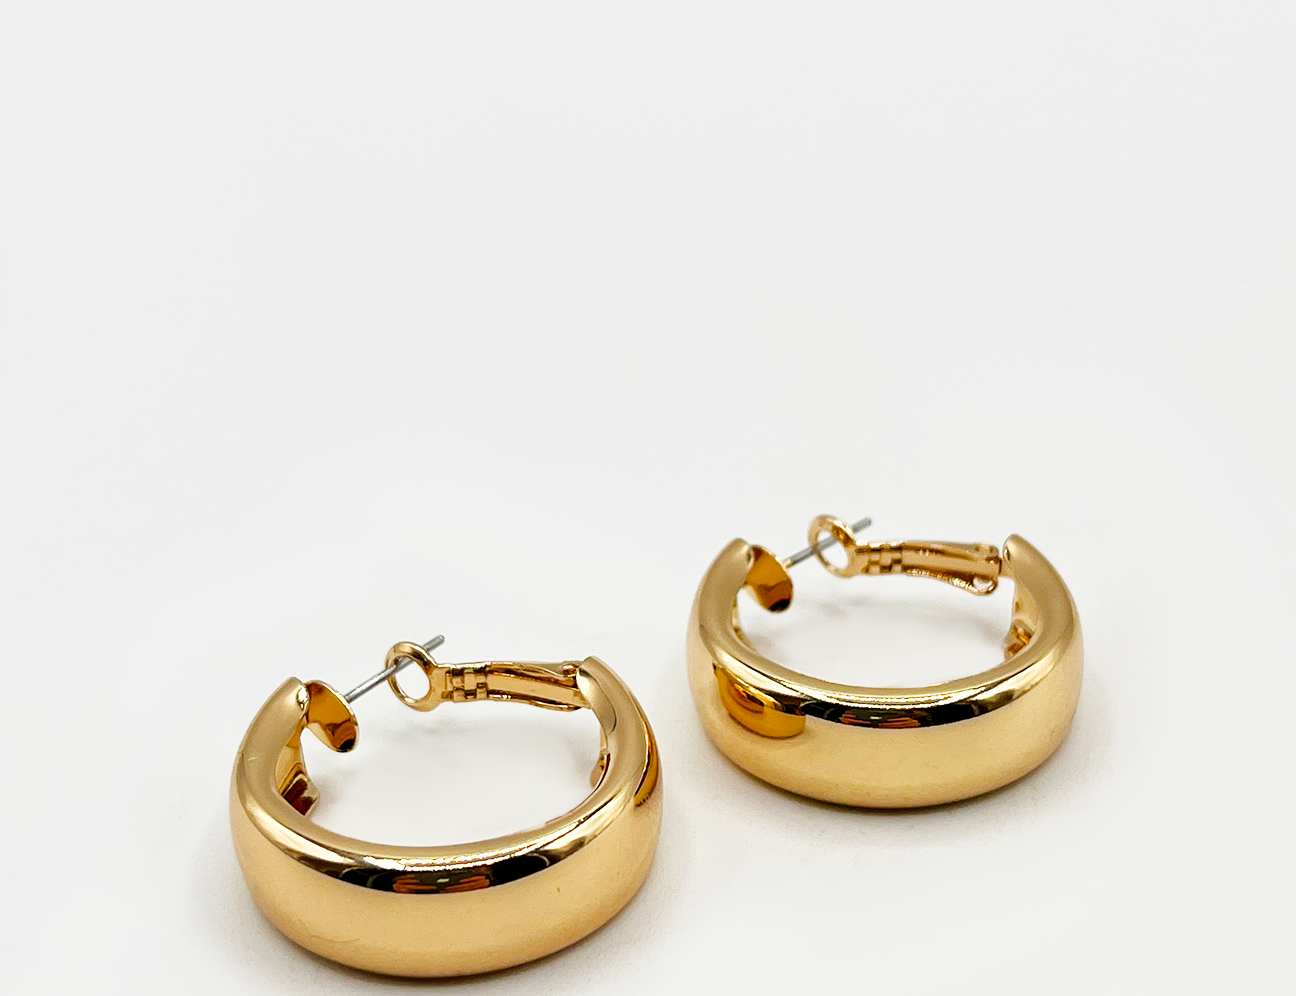 SVNX Chunky Half Hoop Earrings with Crystal Details in Gold - ASOS Outlet